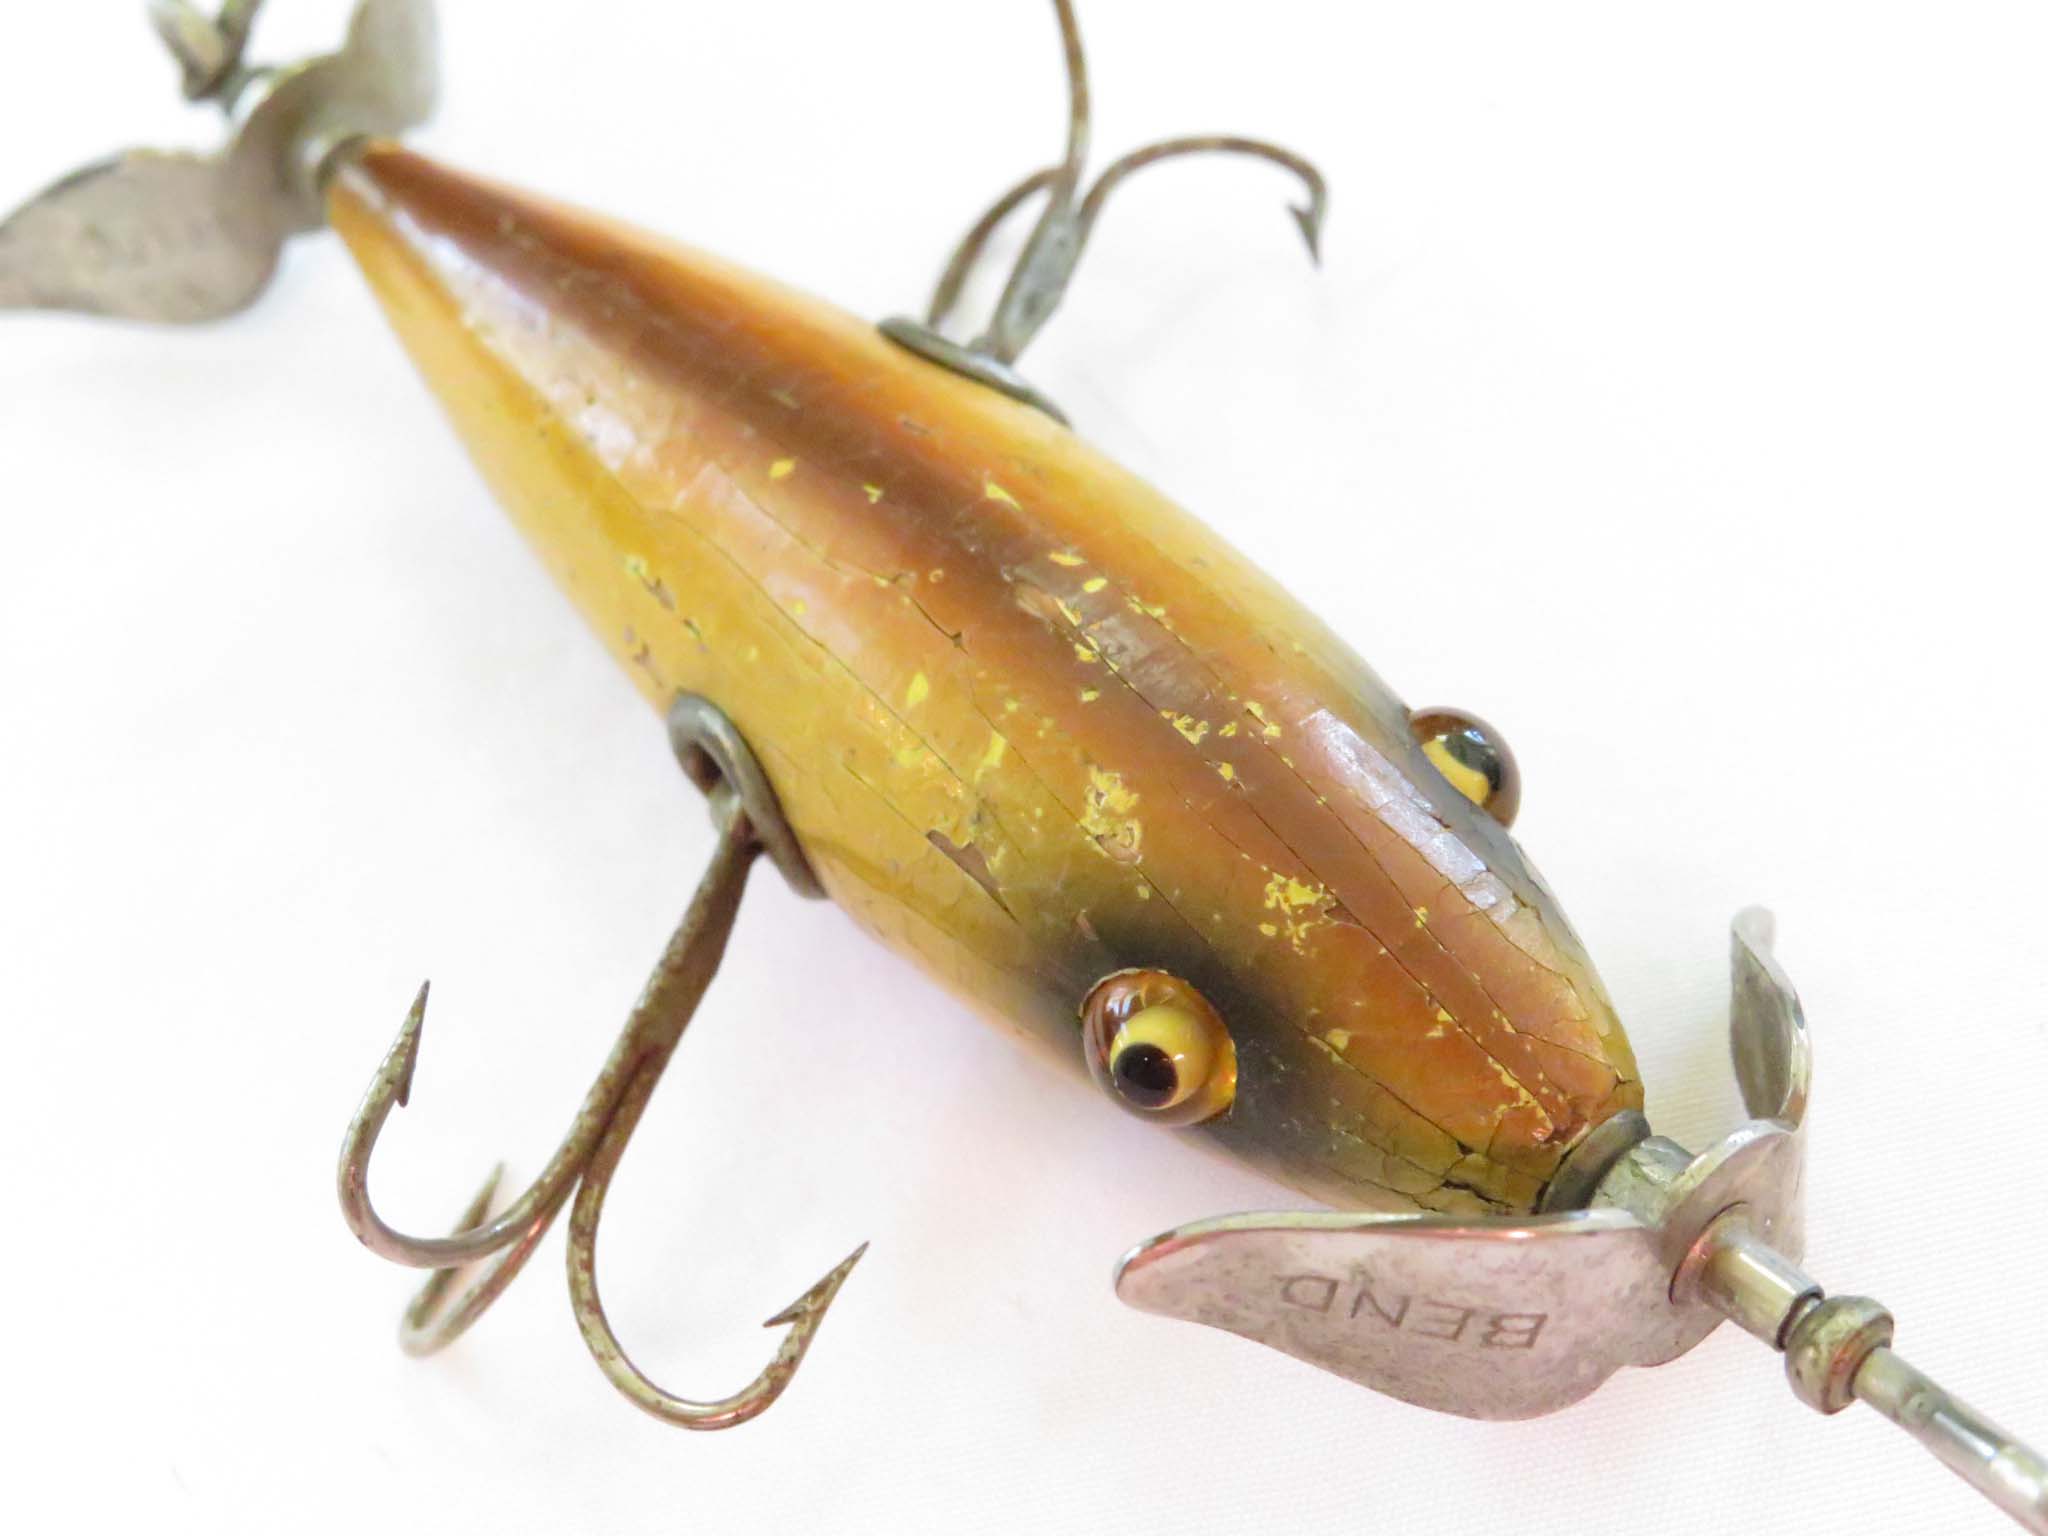 South Bend Underwater Minnow No. 903/904 | The Angling Marketplace